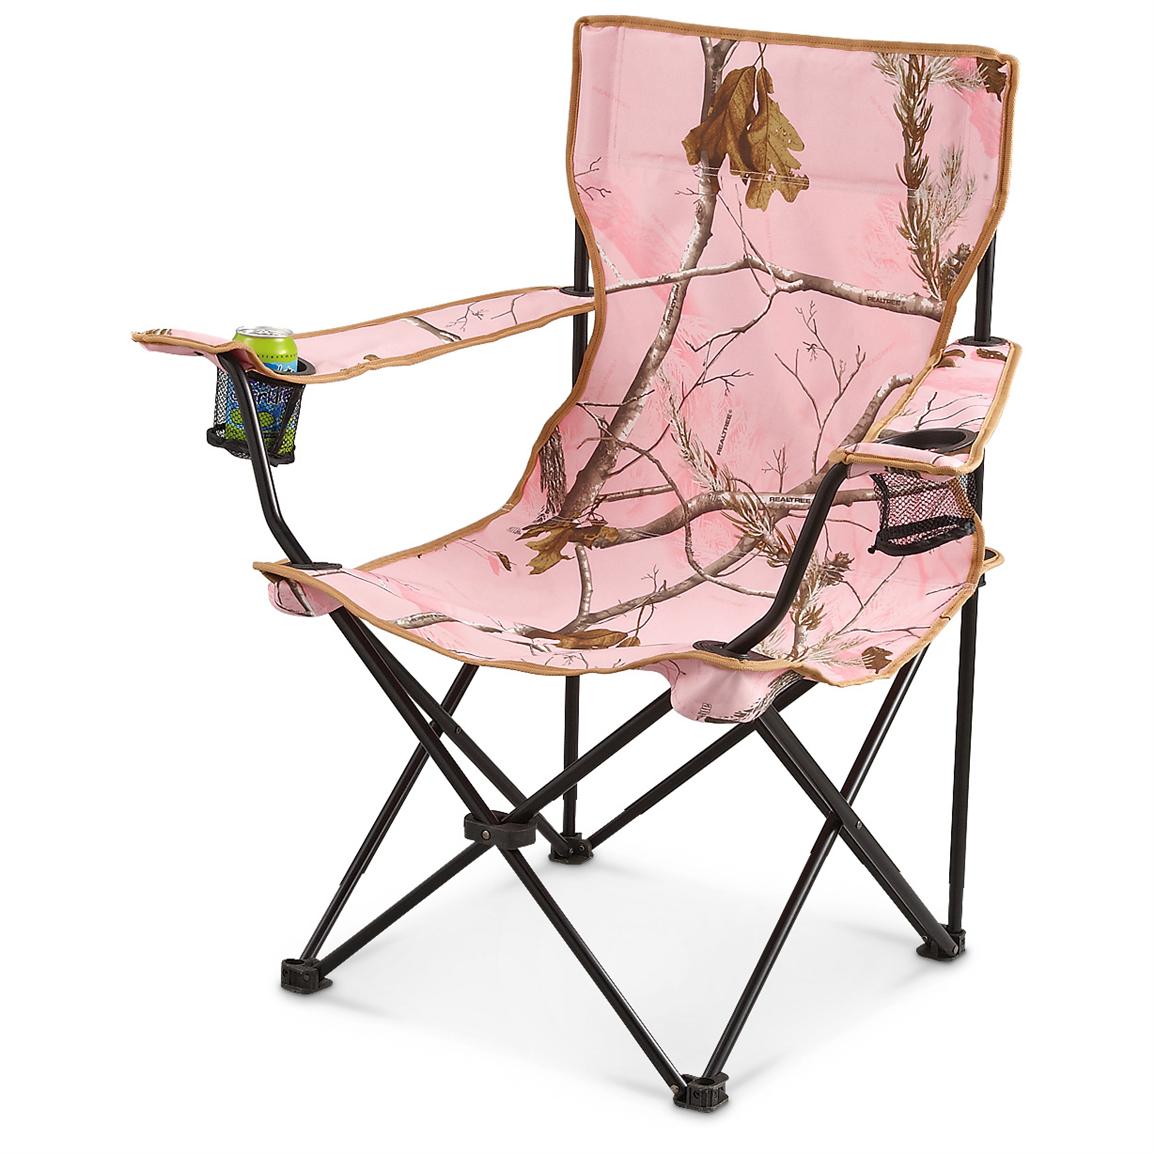 Guide Gear® Realtree® Pink Camp Chair 234550, Camping